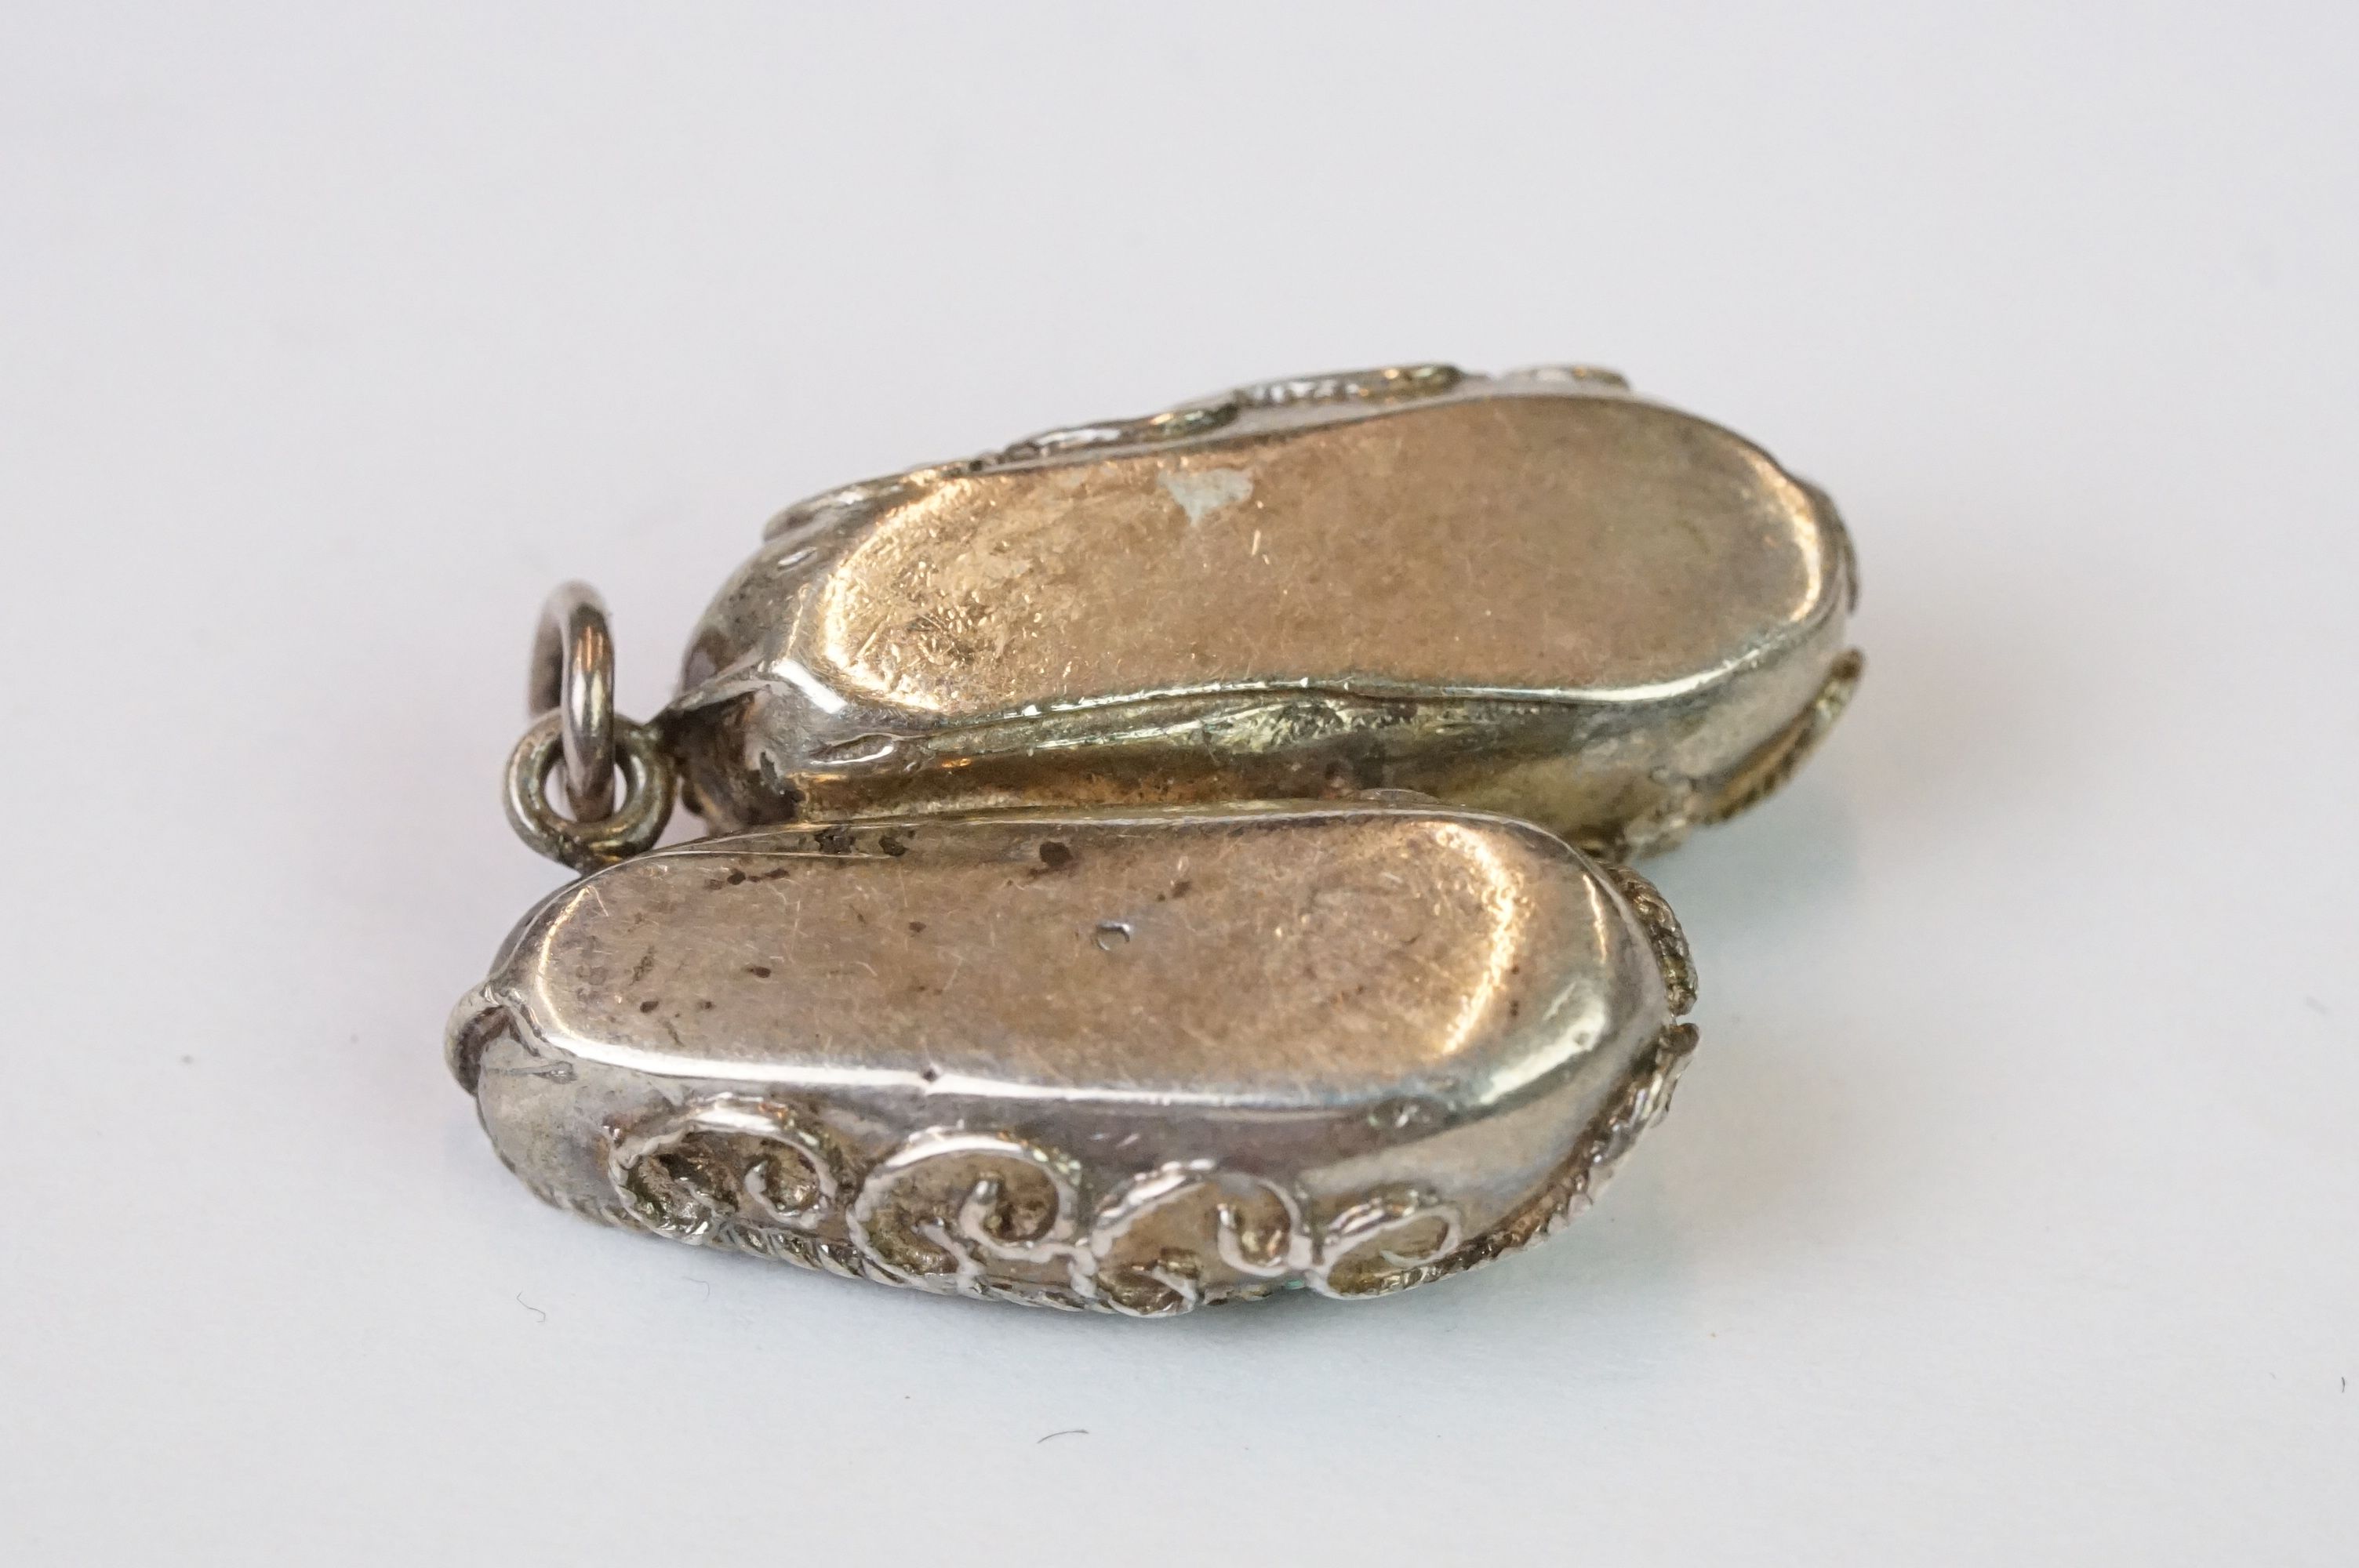 White Metal Pendant in the form of Two Shoes, 3cm long - Image 4 of 4